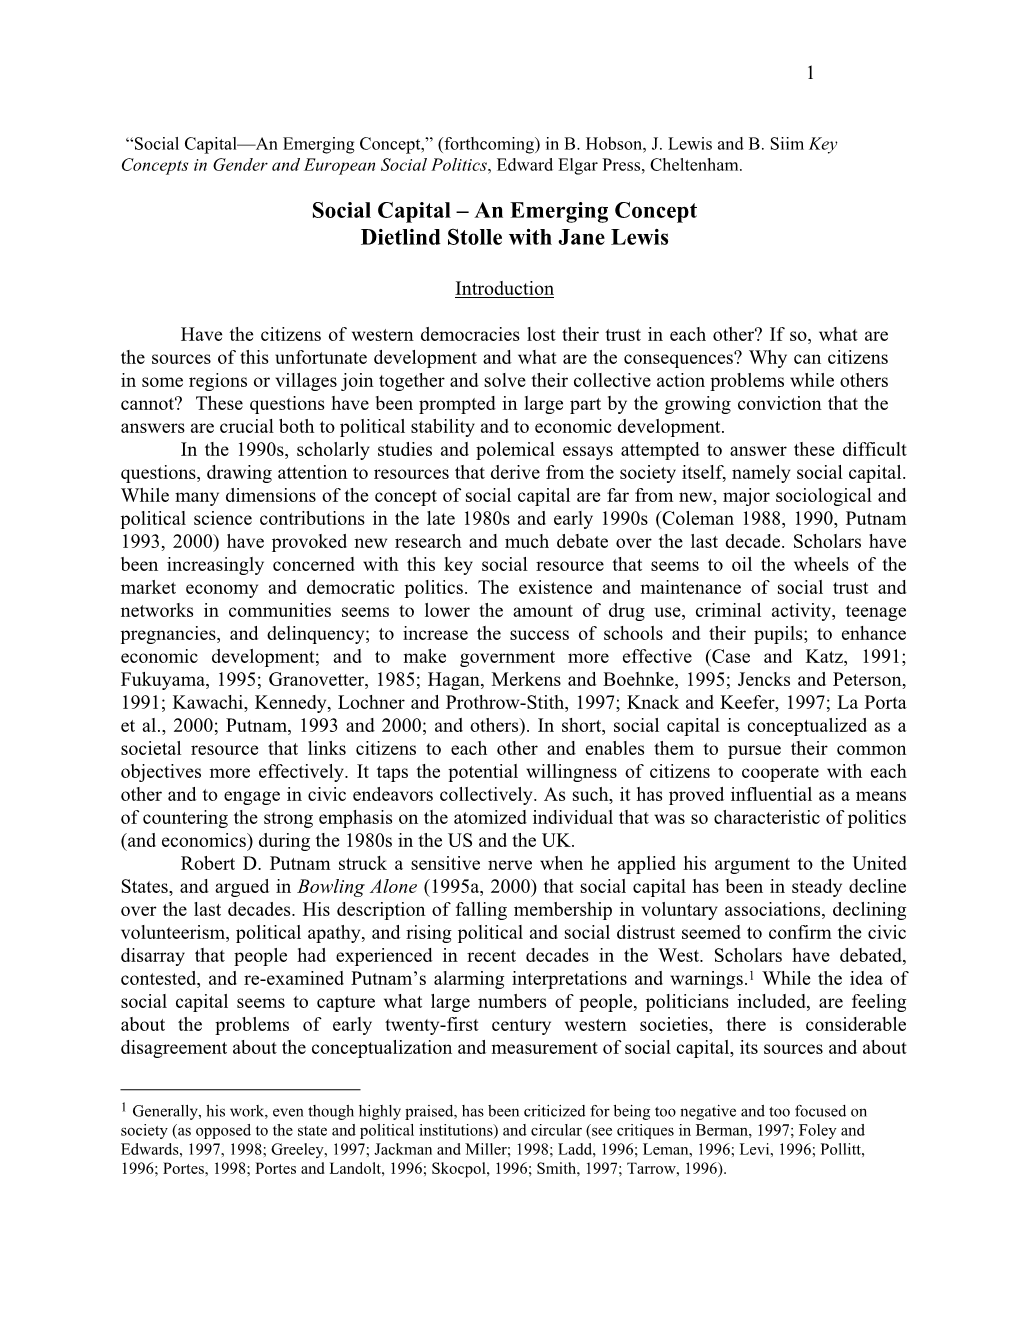 “Social Capital—An Emerging Concept,” (Forthcoming) in B